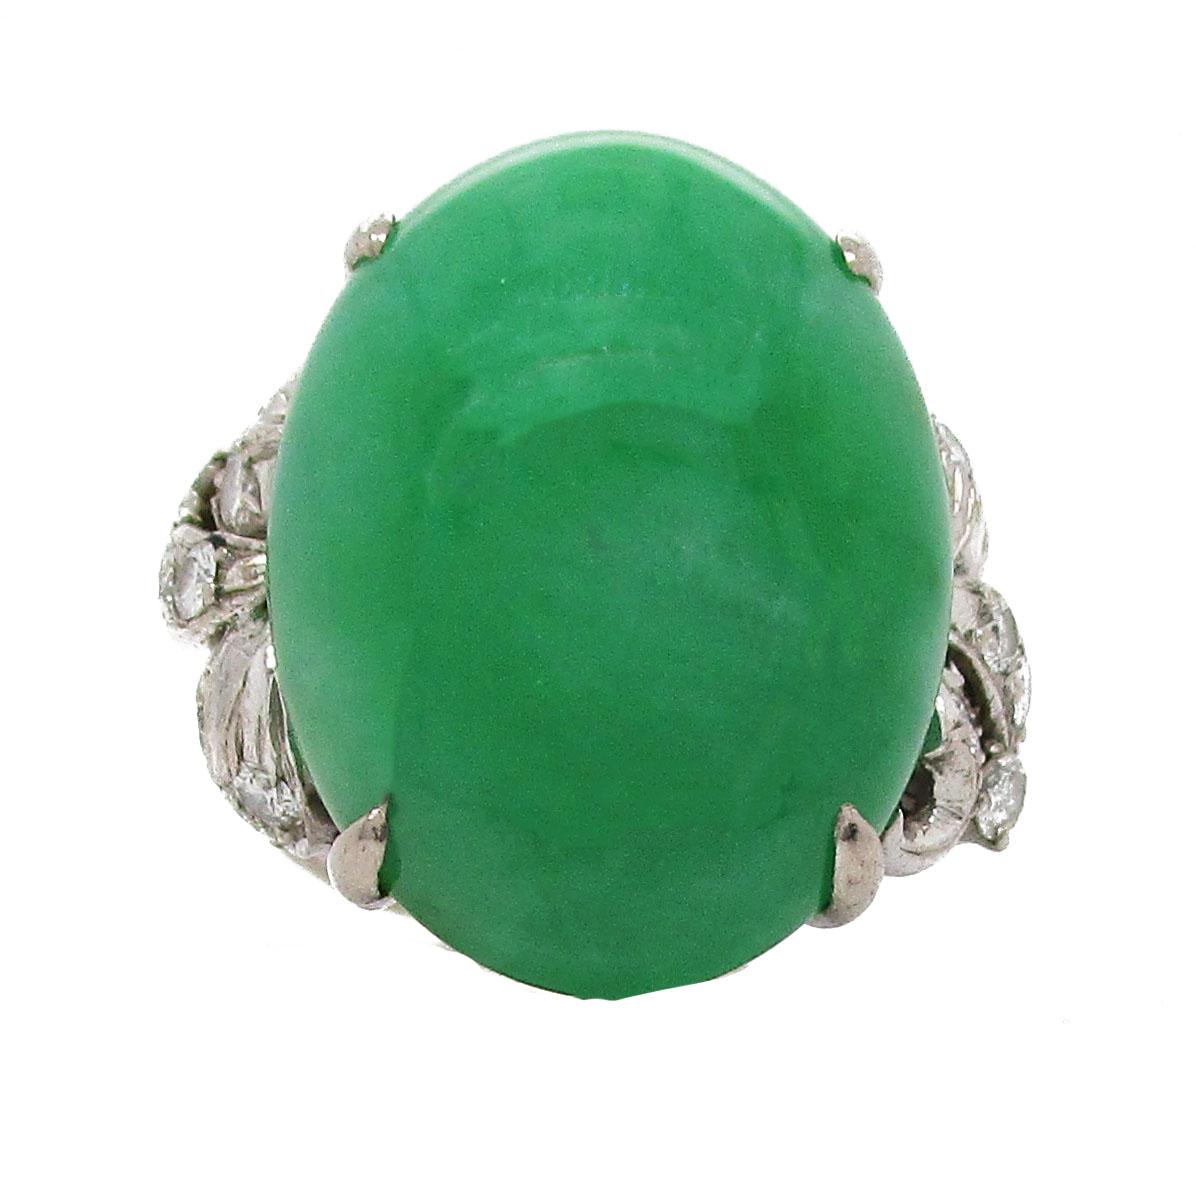 This stunning ring features a gorgeous, untreated, natural green jade cabochon centerpiece. The jade is flanked on each side by a stunning array of diamonds adding up to a total weight of 0.5 carats. The ring itself is bright 14 karat white gold.